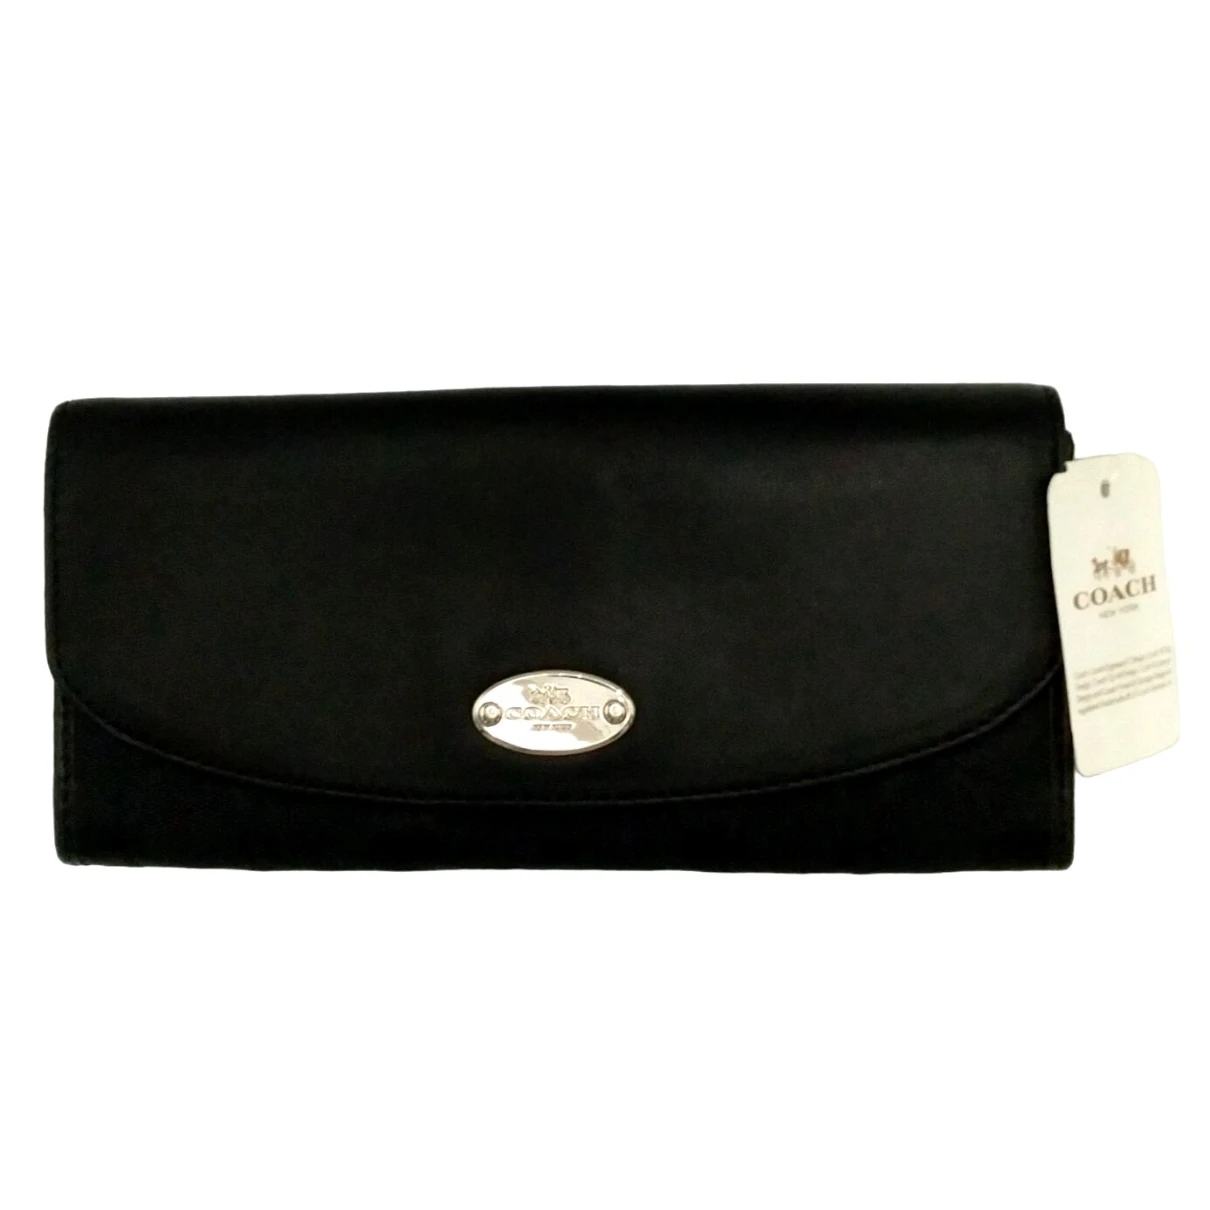 accessories Coach wallets for Female Leather. Used condition